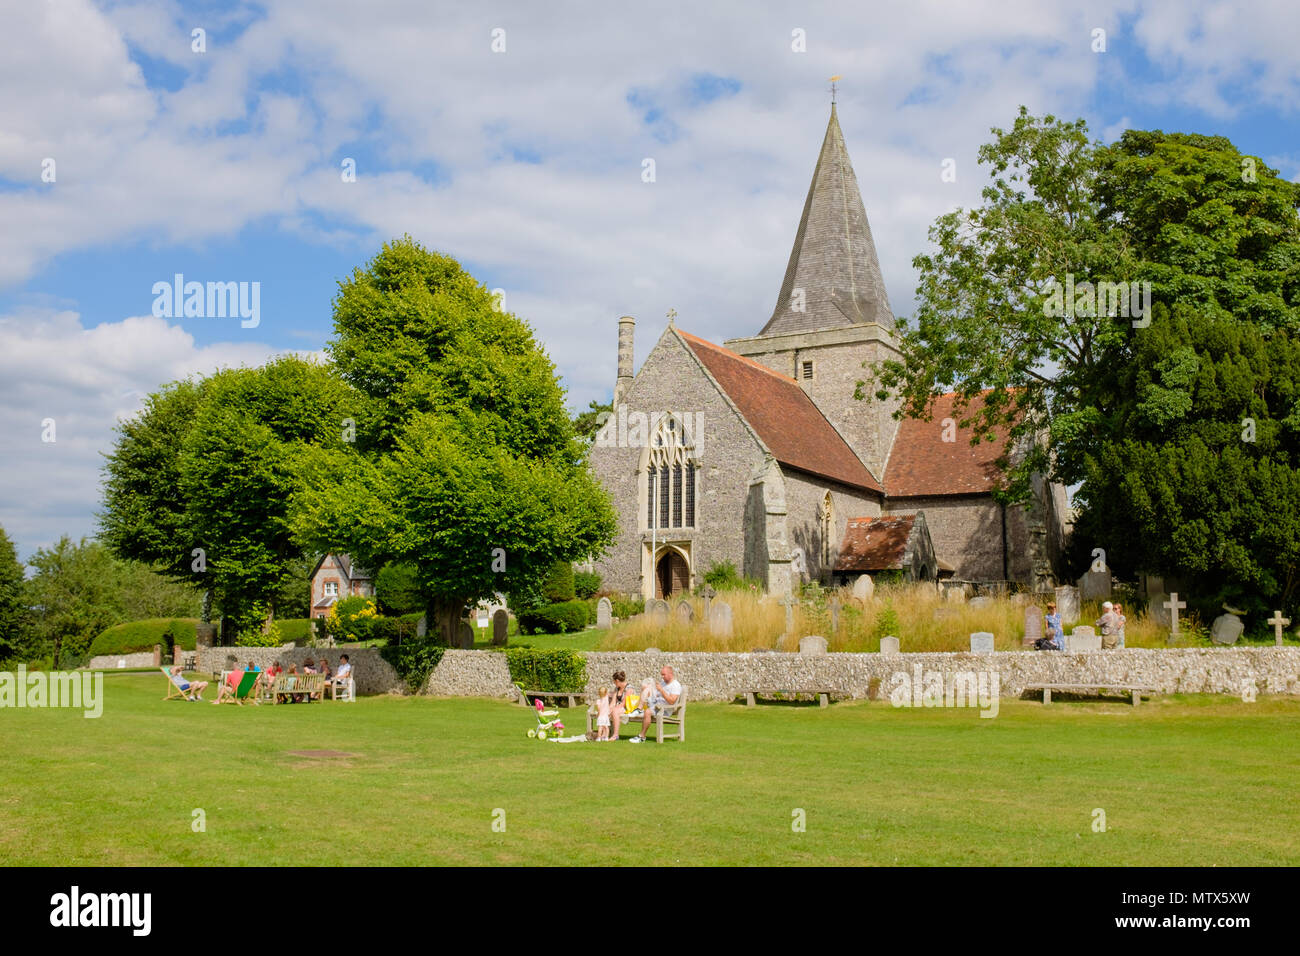 14th century Church of St Andrew's on the village green in Alfriston, East Sussex, England on a summer afternoon with people relaxing on the grass. Stock Photo